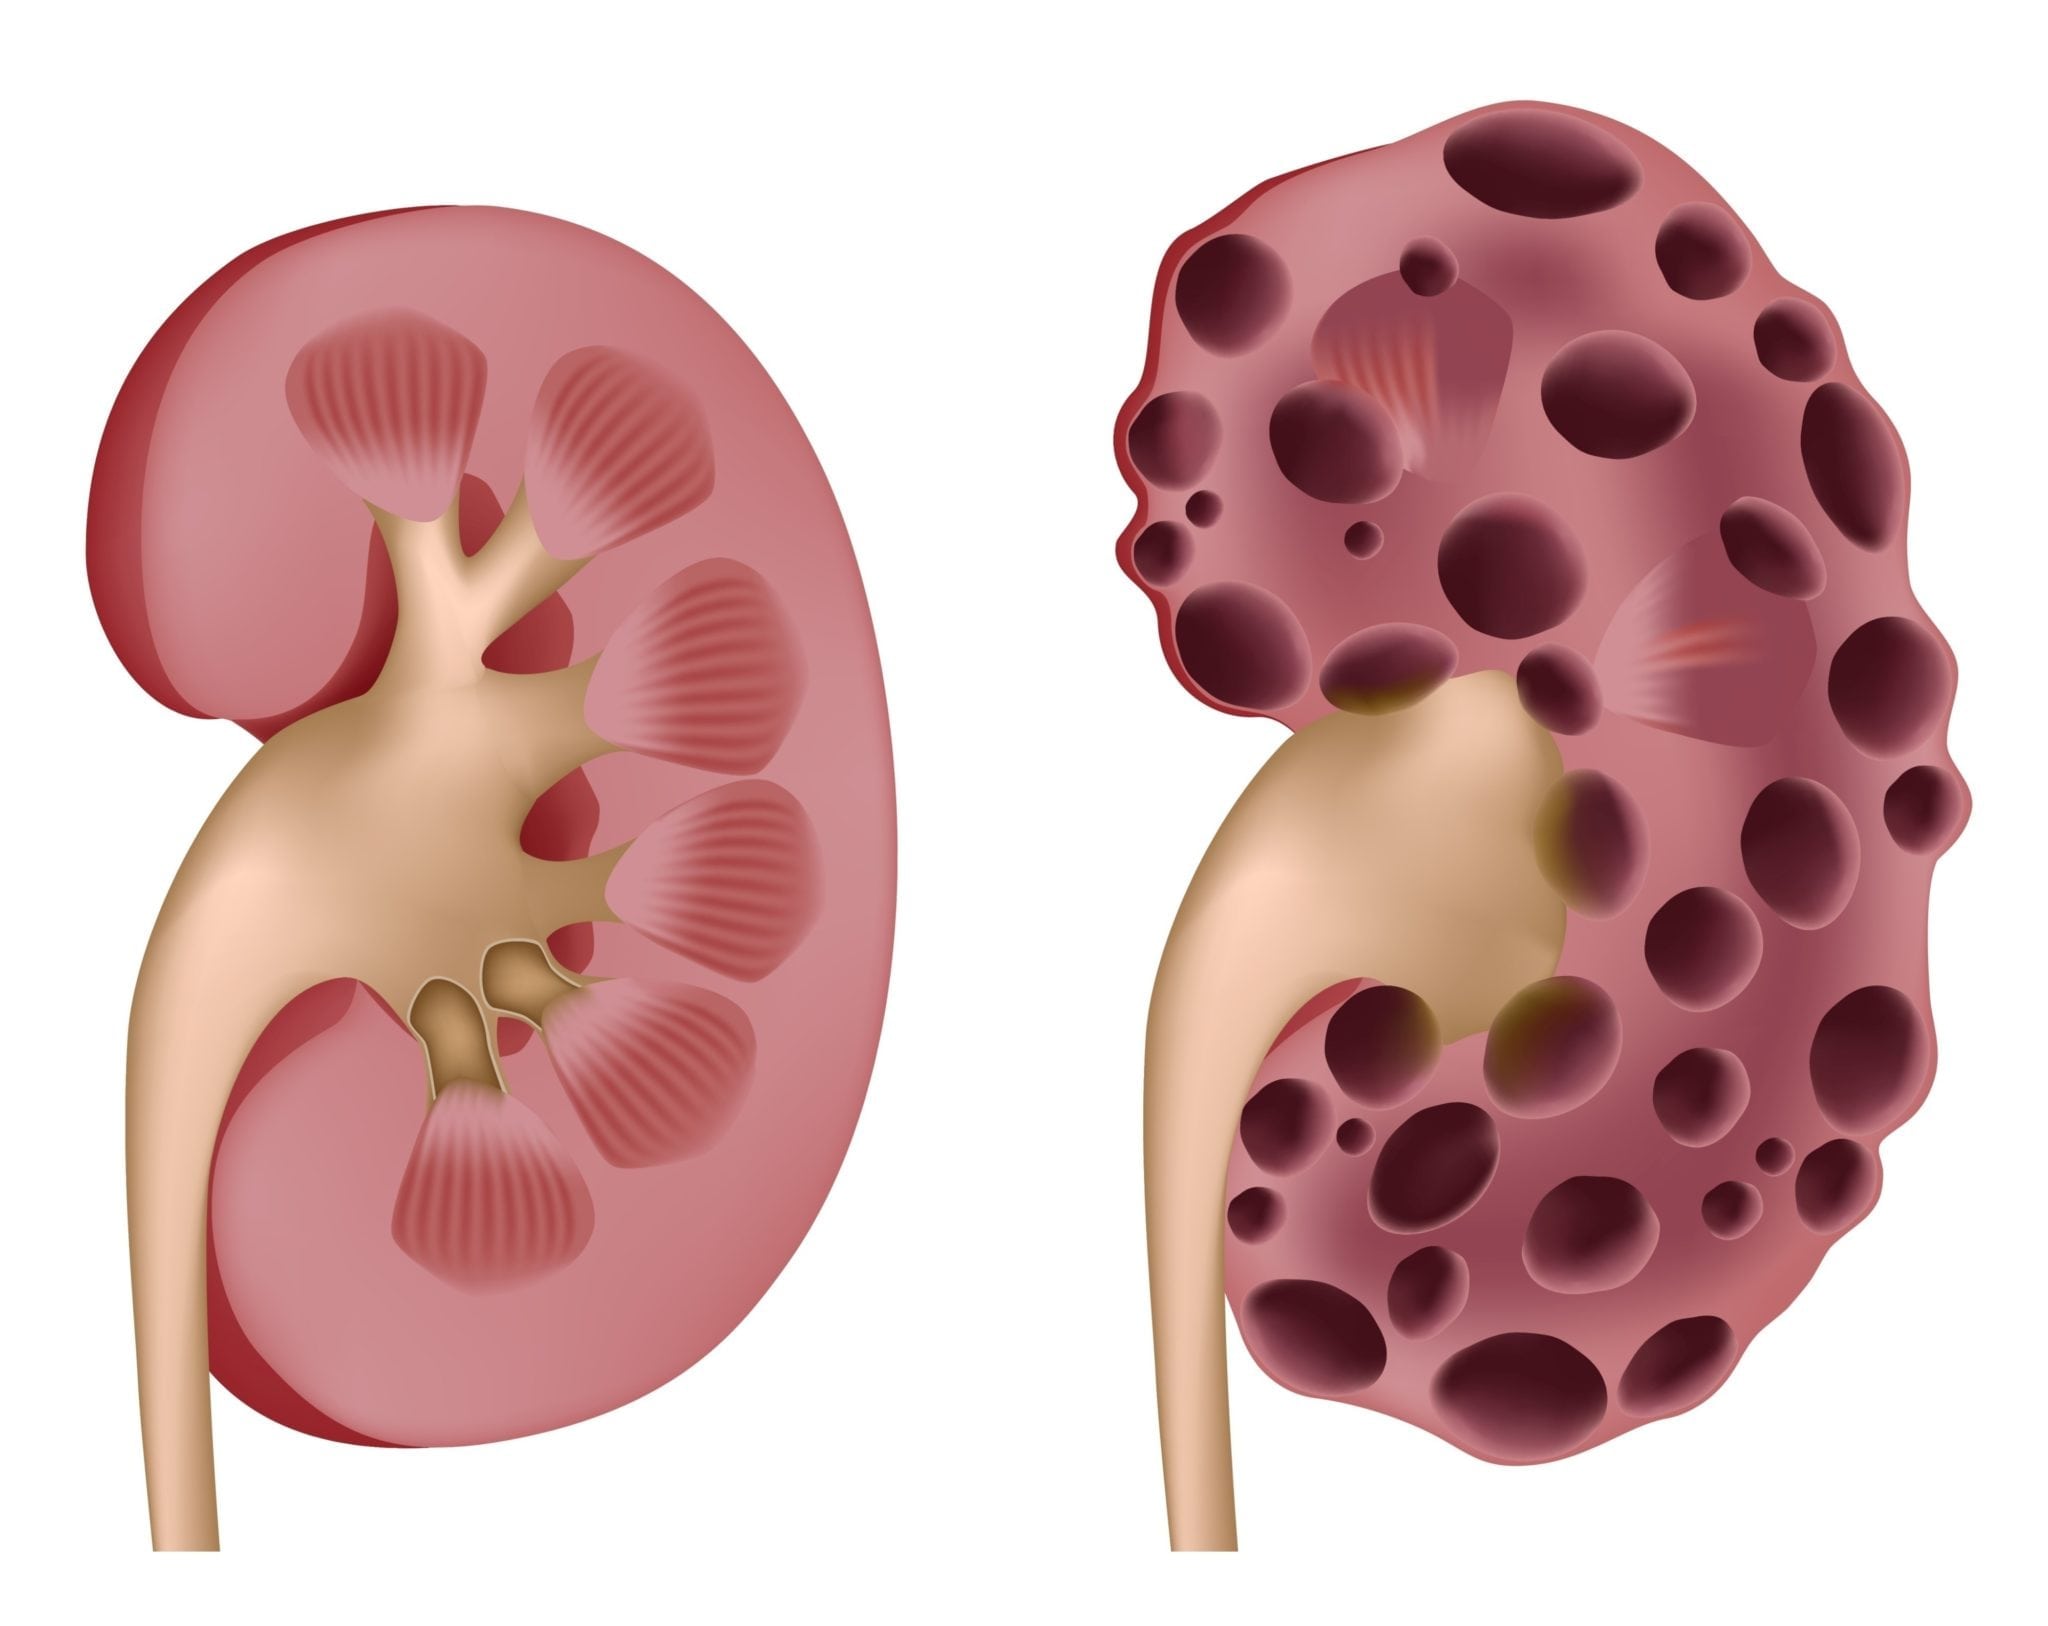 Kidney Cysts